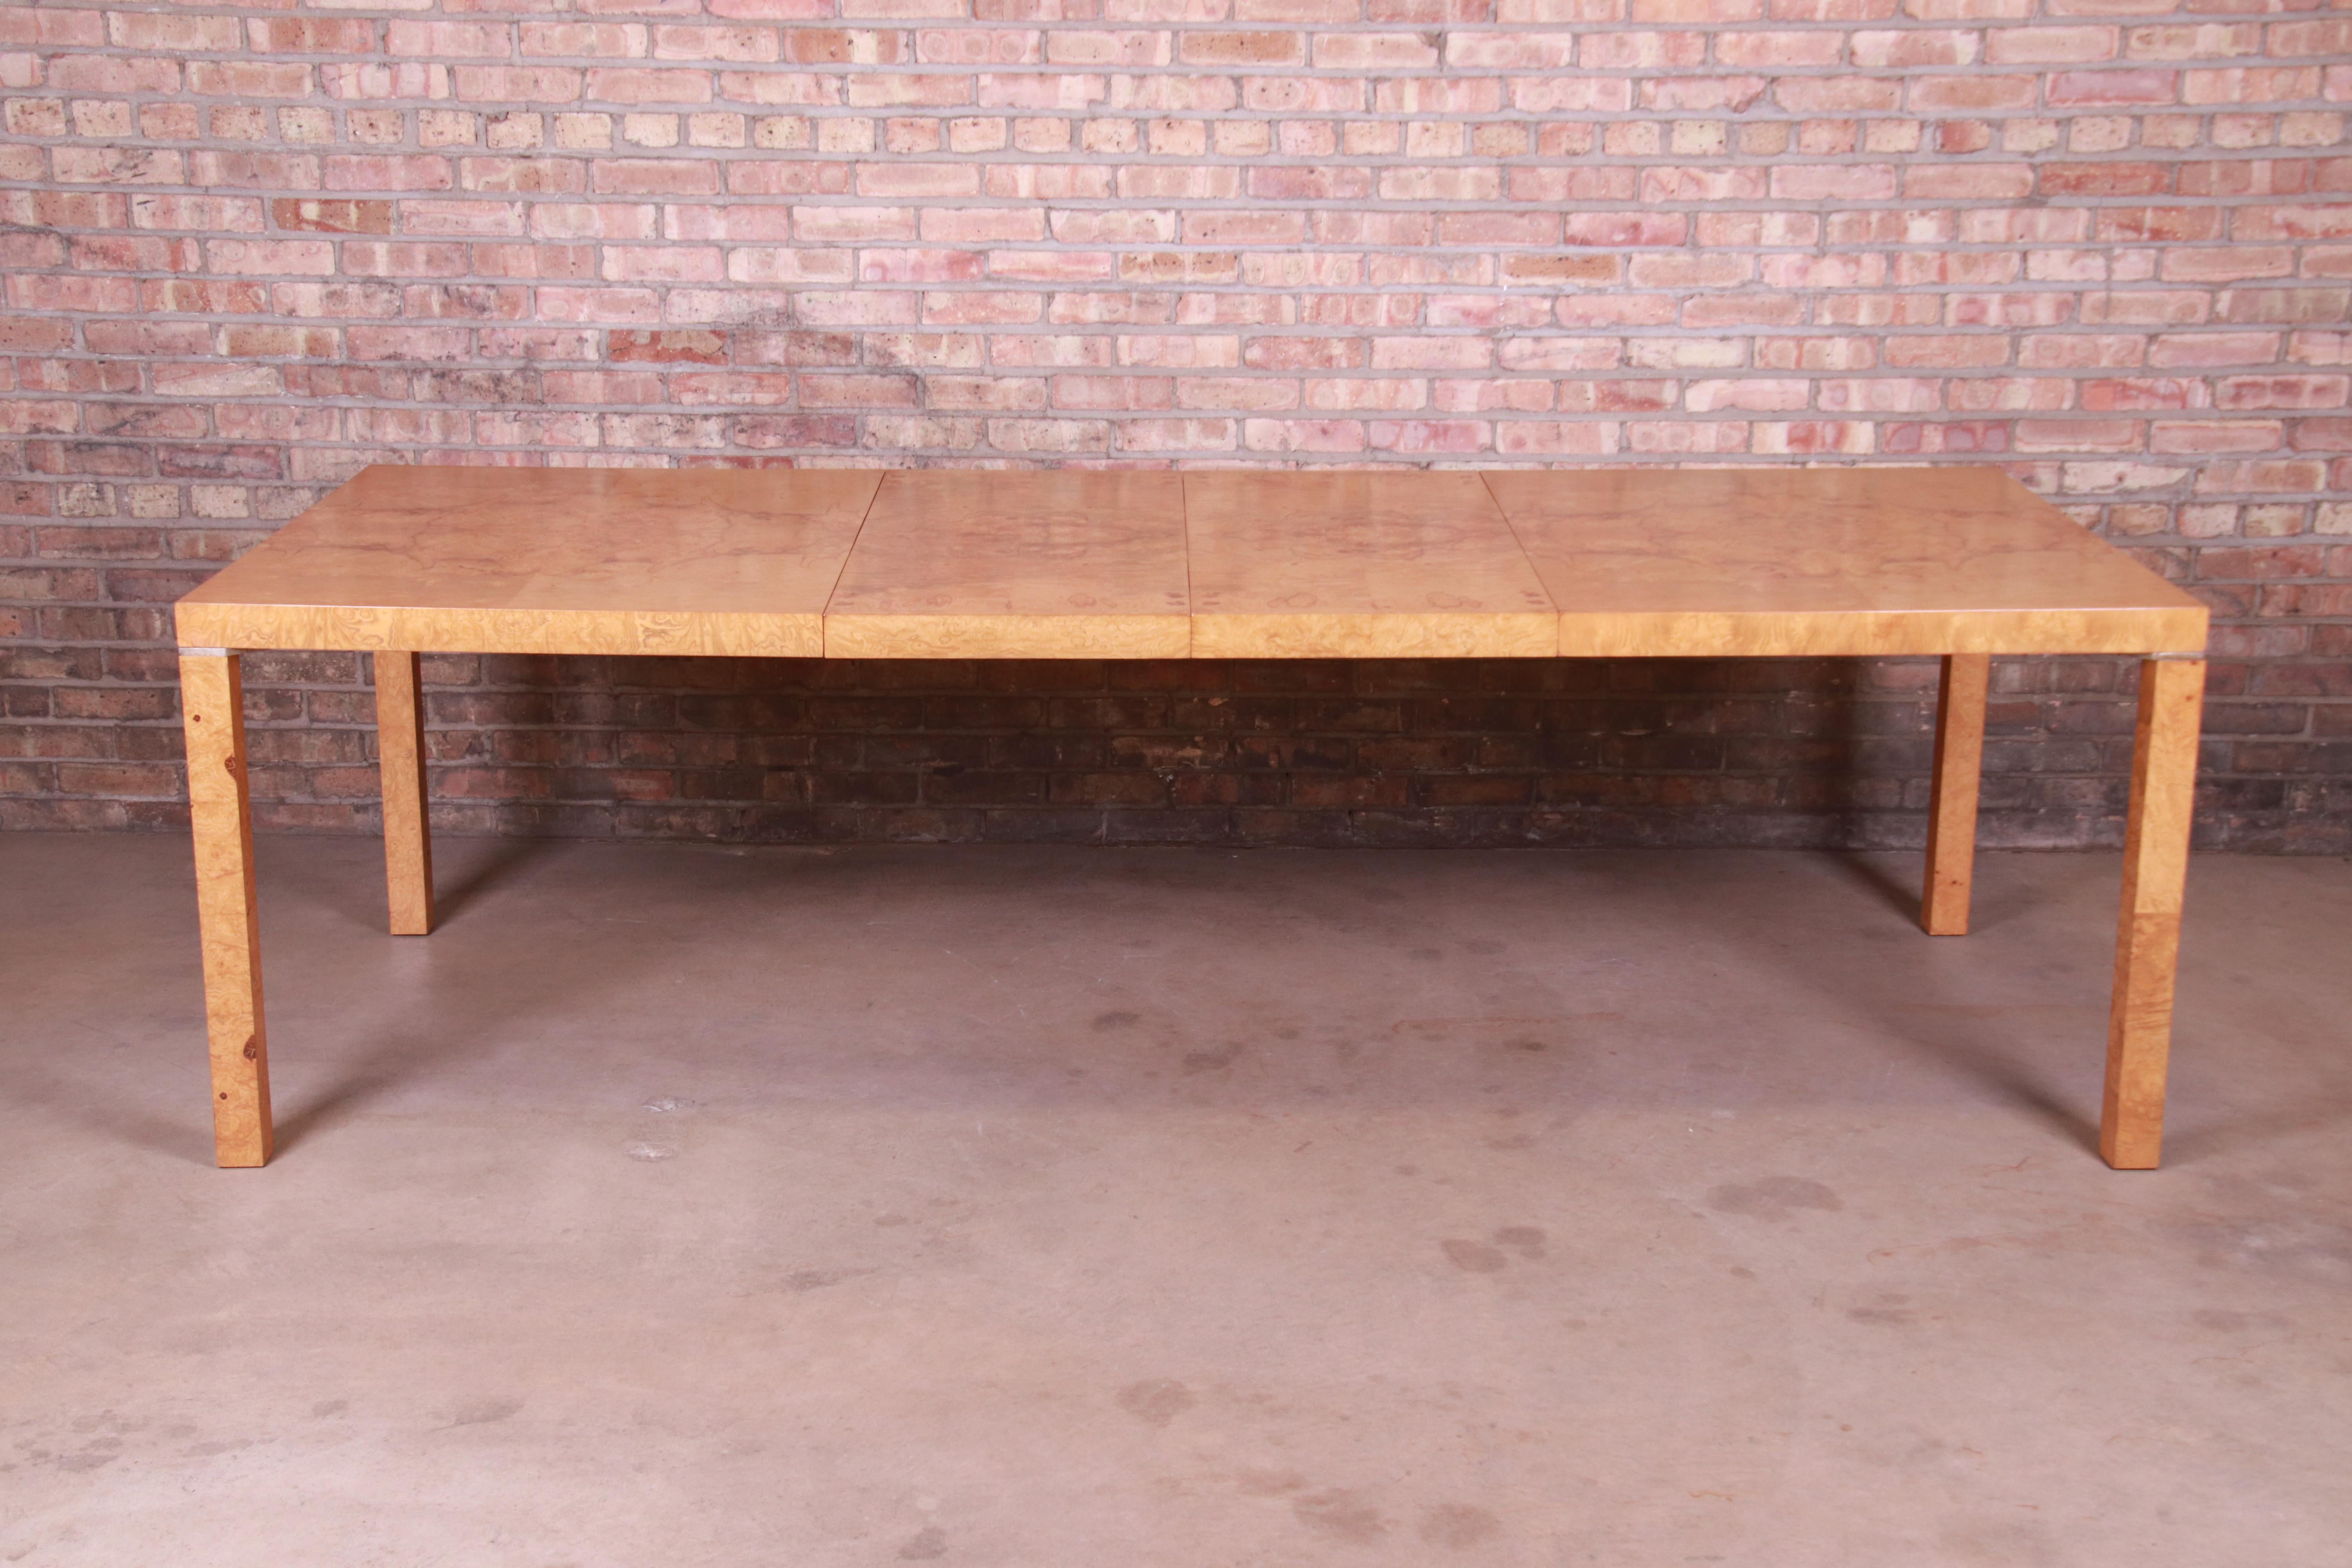 A gorgeous Mid-Century Modern Parsons style extension dining table in bookmatched olive ash burl wood

In the manner of Milo Baughman

By Lane Furniture

USA, circa 1970s

Measures: 62